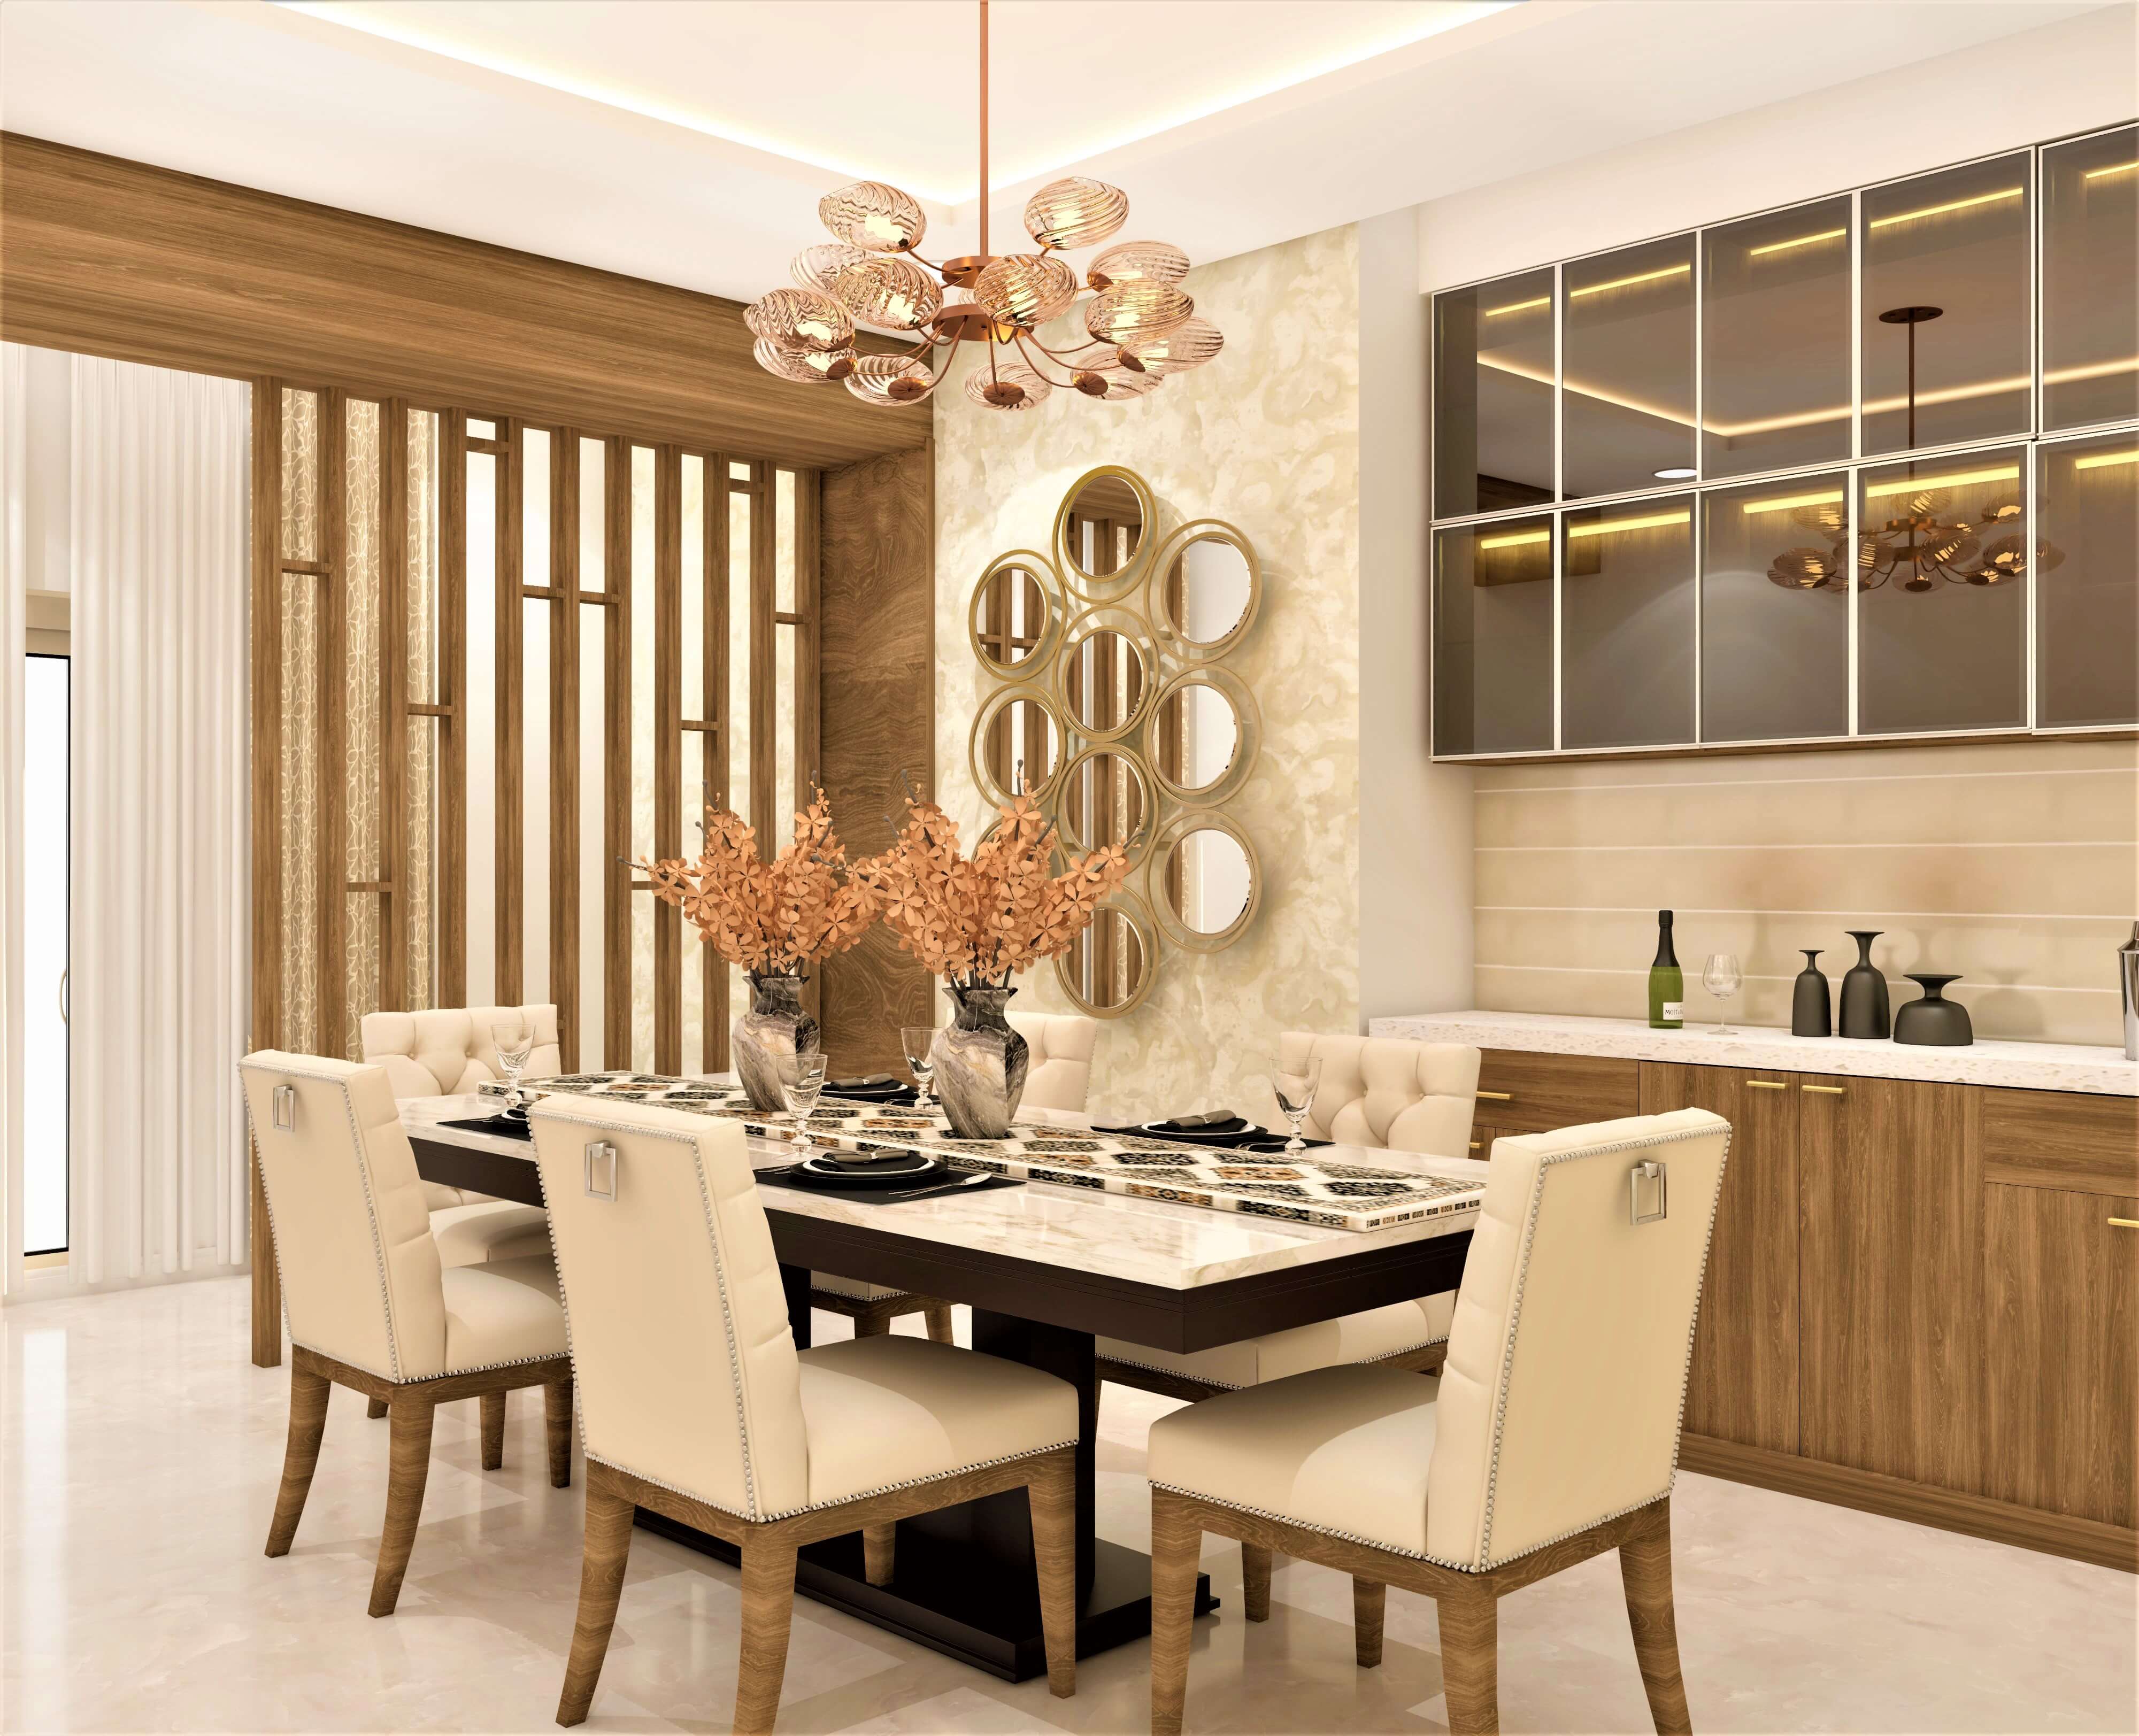 Modern dining room design with crockery unit - Beautiful Homes